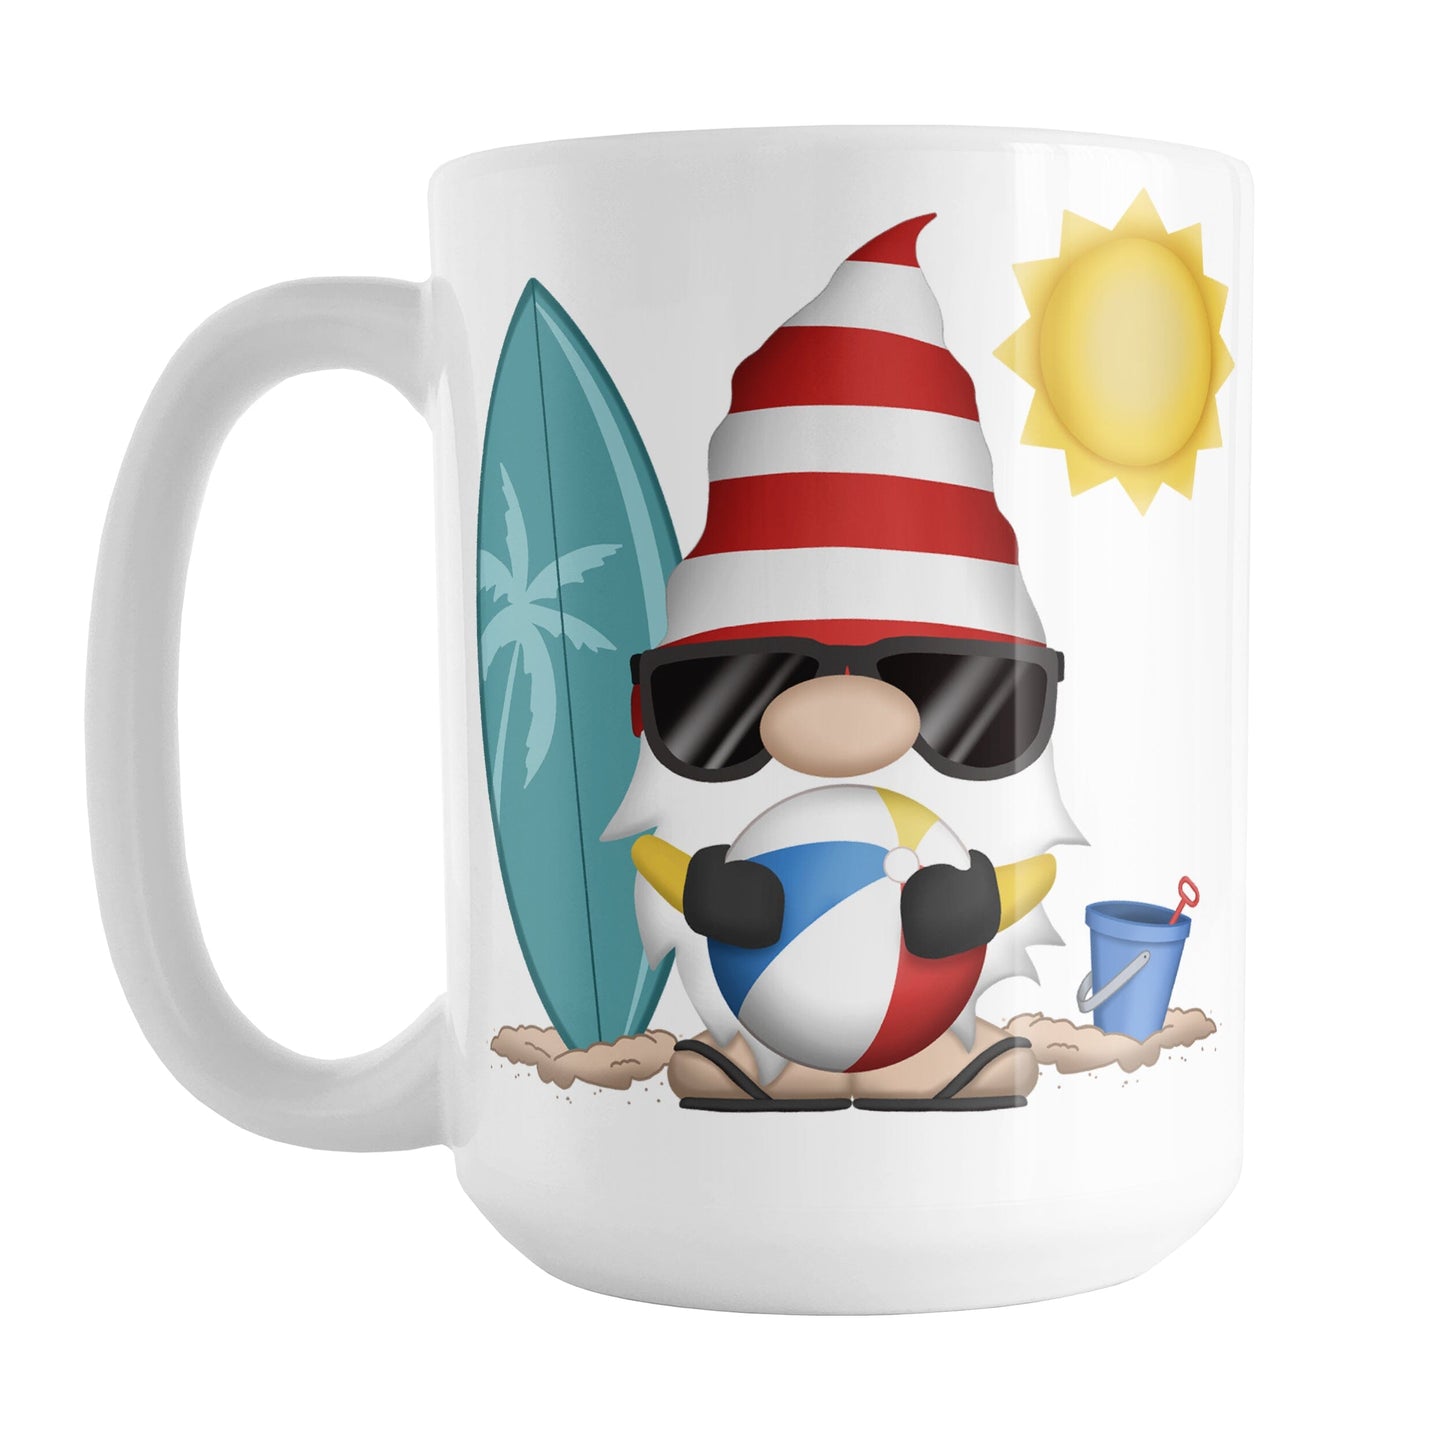 Summer Beach Gnome Mug (15oz) at Amy's Coffee Mugs. A ceramic coffee mug designed with an adorable gnome in sunglasses, holding a beach ball, with a surfboard and bucket in the sand on either side of him, and a bright yellow sun in the sky. This cute gnome is on both sides of the mug.